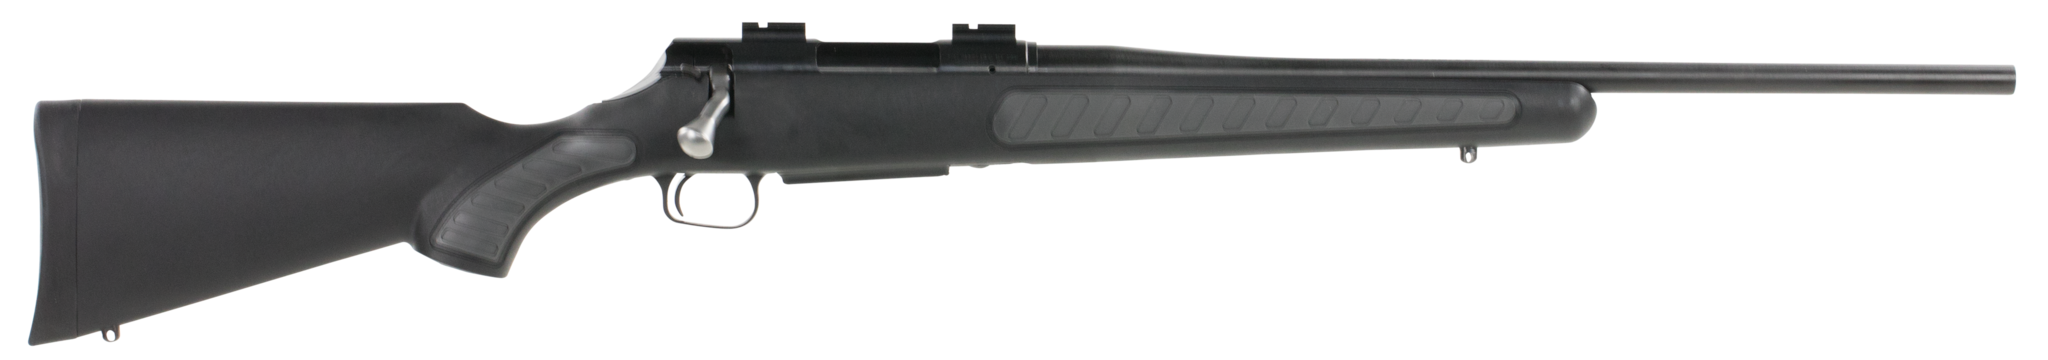 Image of THOMPSON/CENTER ARMS VENTURE COMPACT